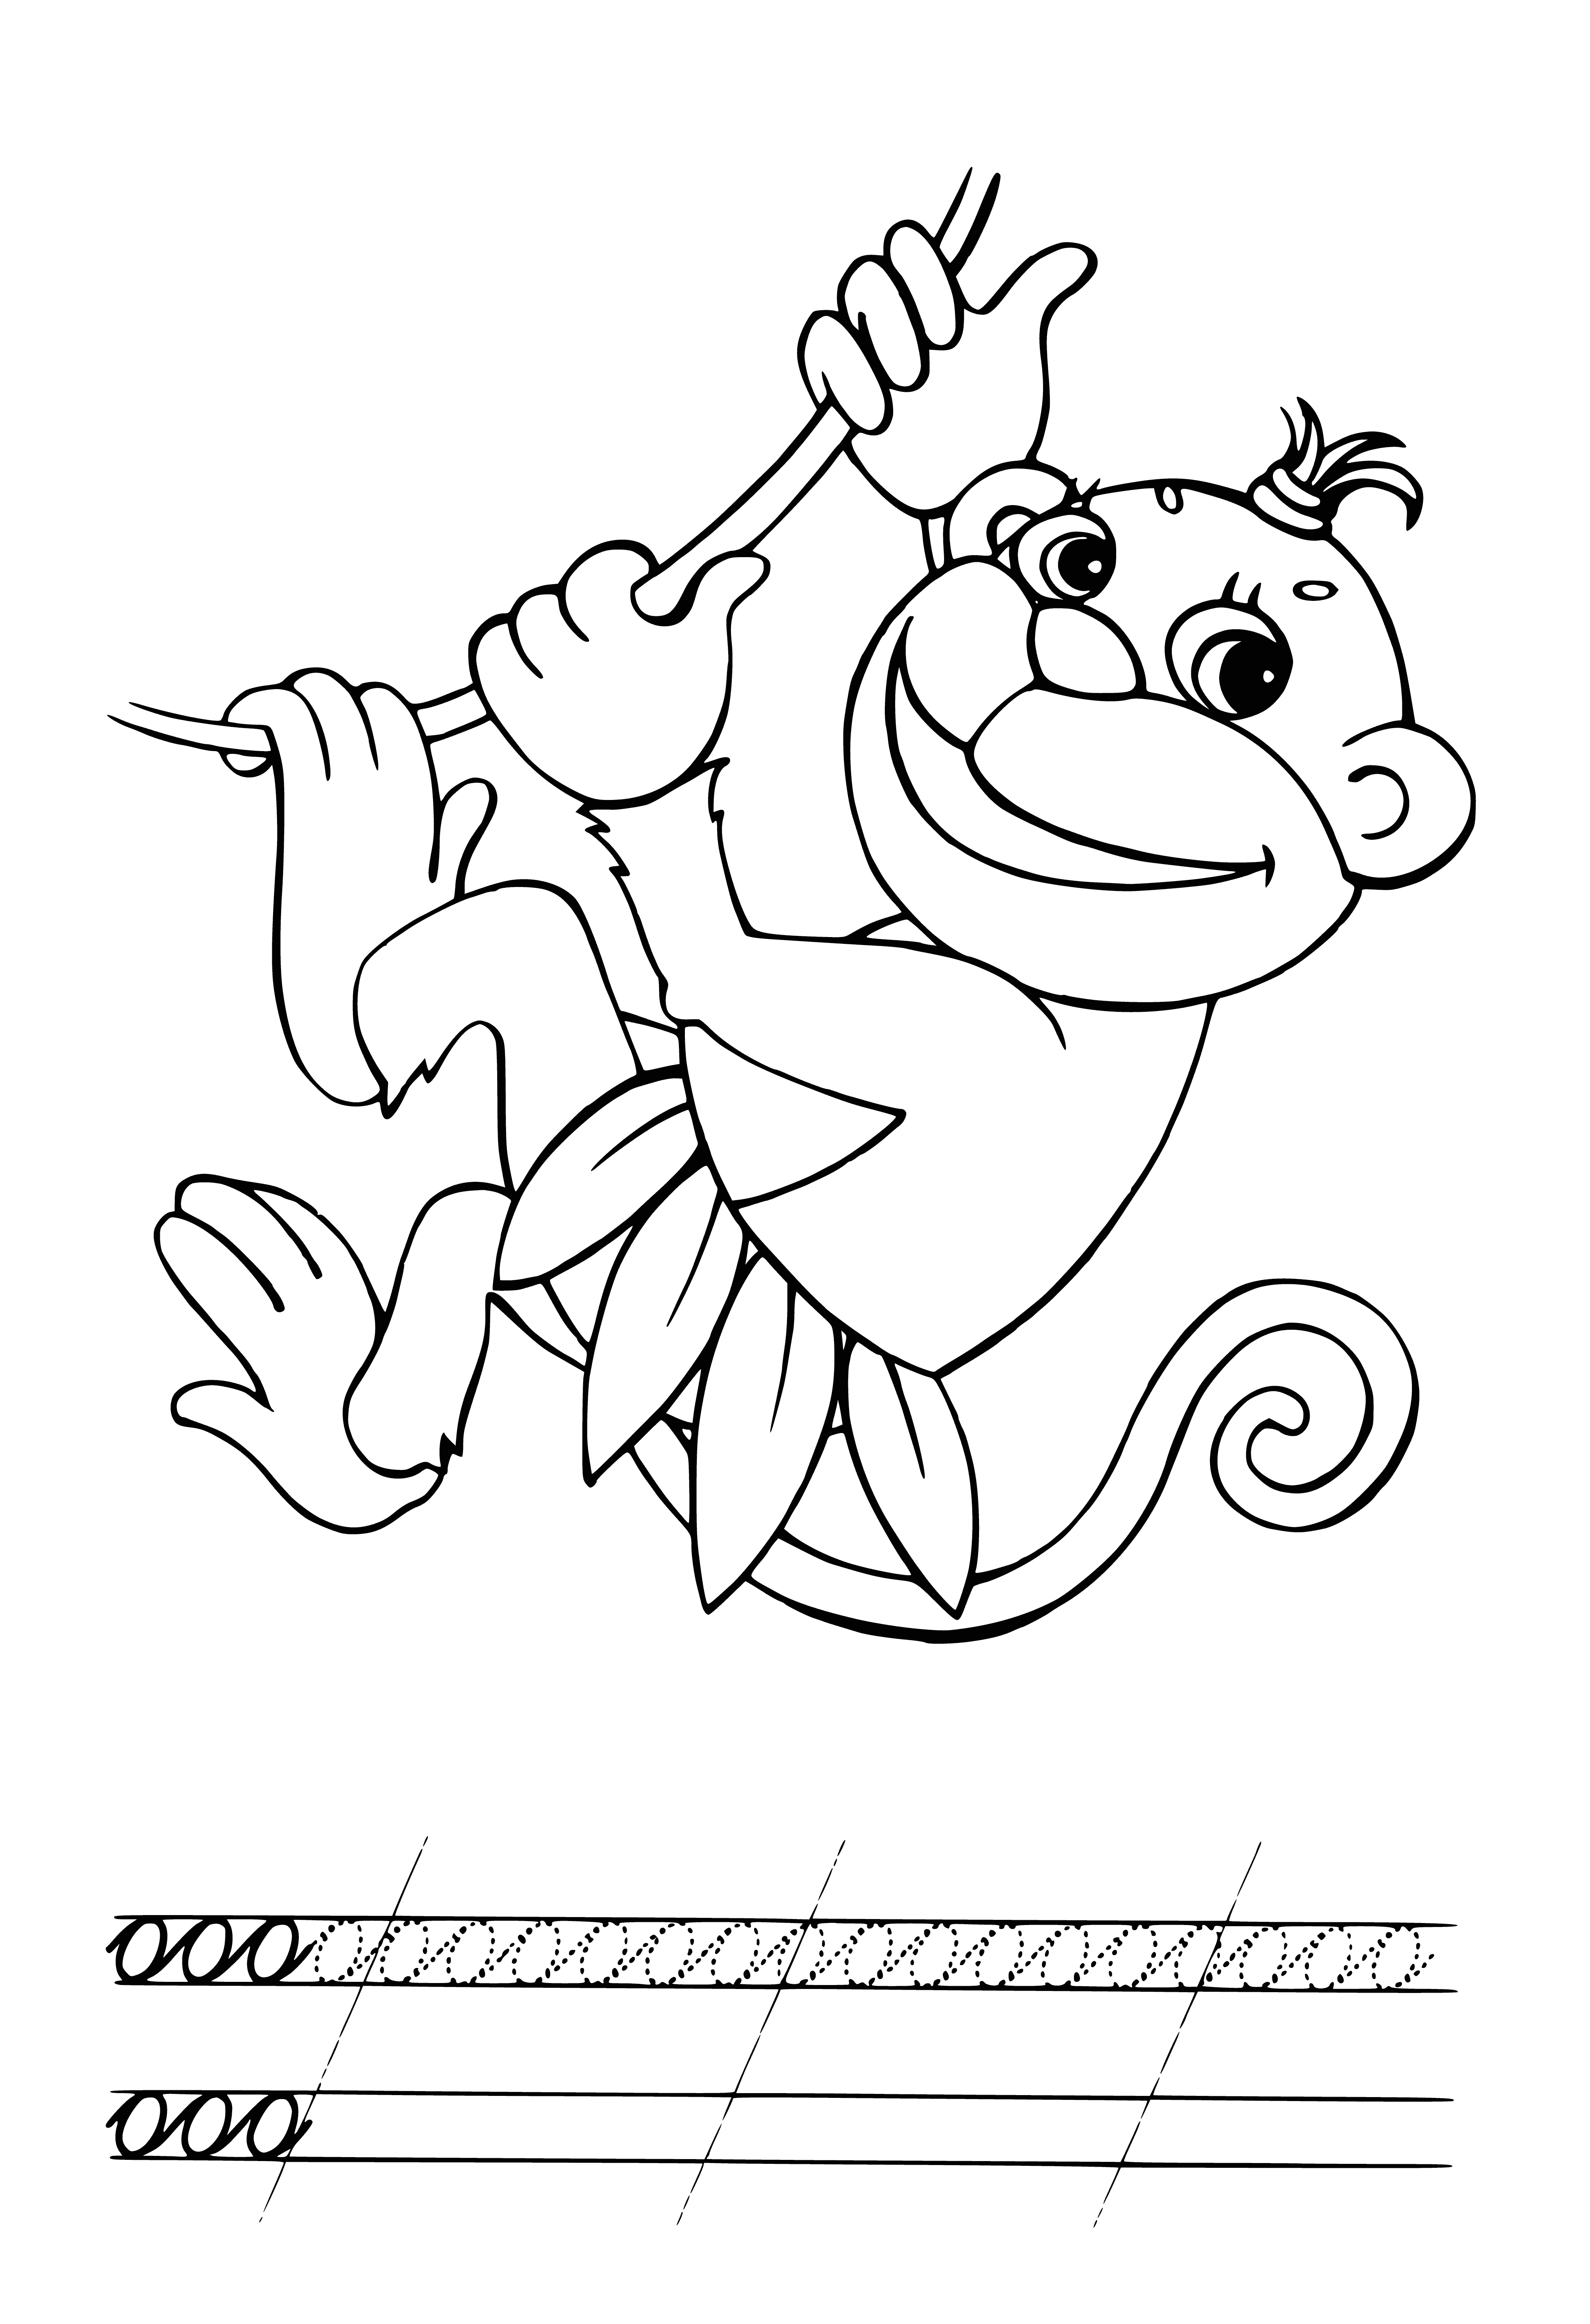 coloring page: A cute monkey with a banana, brown fur and black eyes is in this coloring page! #cute #coloringpage #monkey